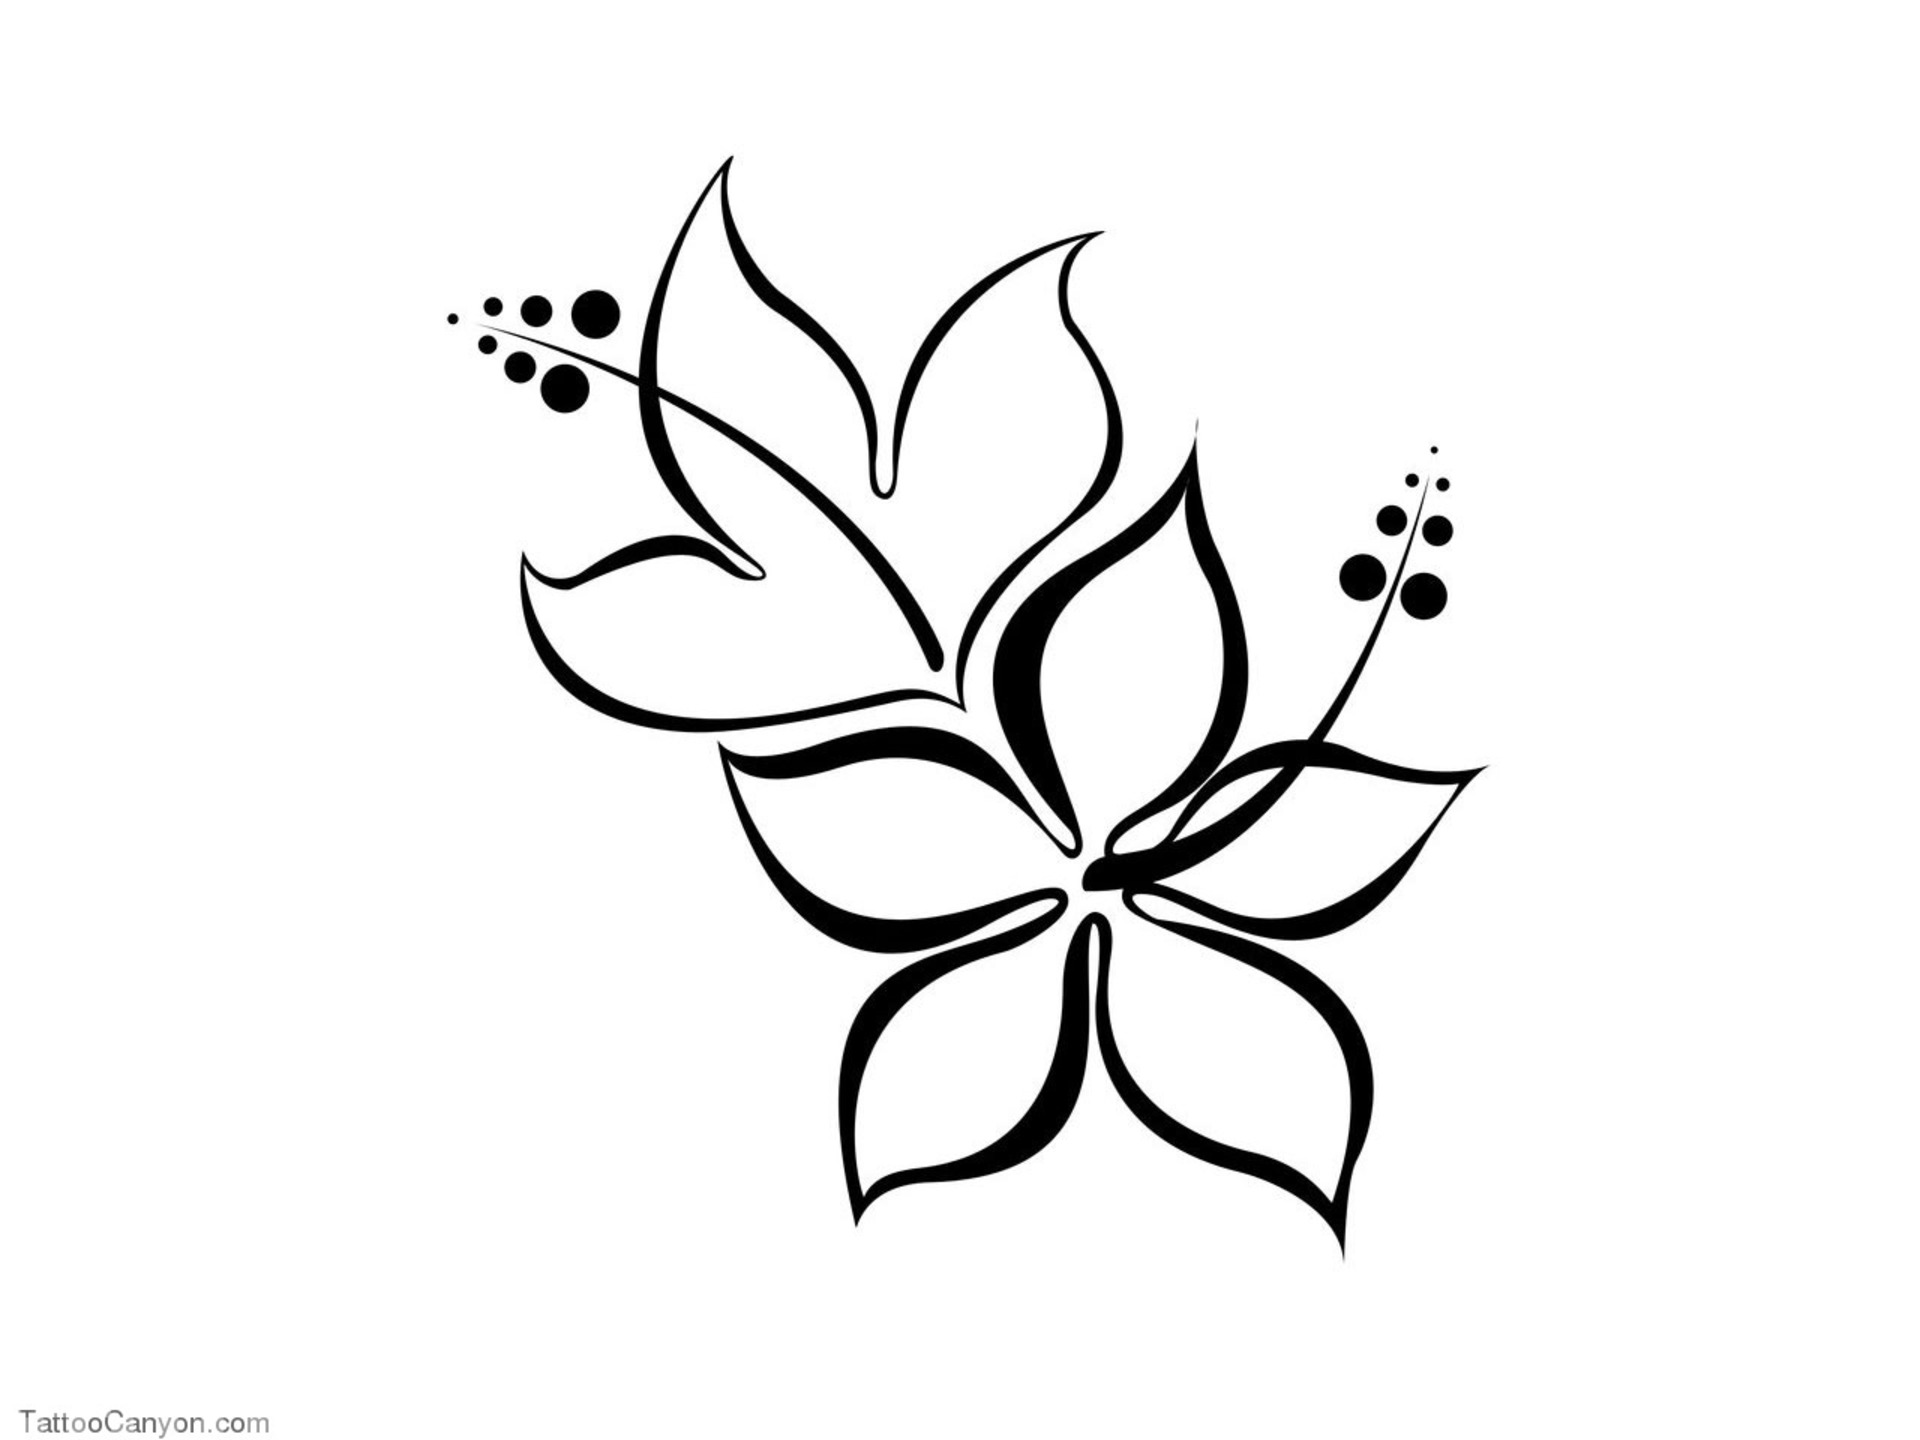 Free Designs Hibiscus Flower Tattoo Wallpaper Picture # - ClipArt 